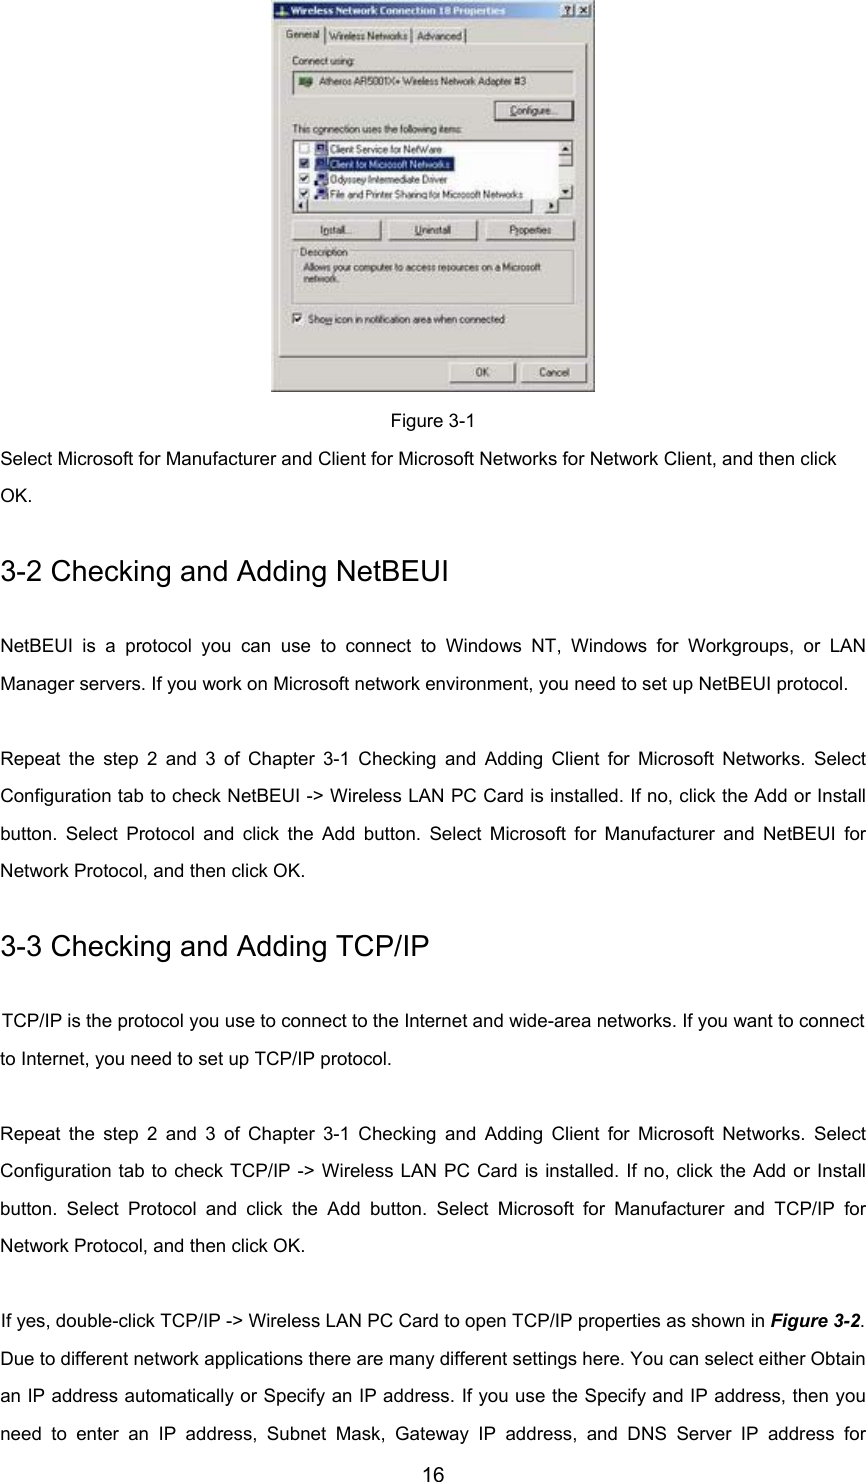 16Figure 3-1Select Microsoft for Manufacturer and Client for Microsoft Networks for Network Client, and then clickOK.3-2 Checking and Adding NetBEUINetBEUI is a protocol you can use to connect to Windows NT, Windows for Workgroups, or LANManager servers. If you work on Microsoft network environment, you need to set up NetBEUI protocol.Repeat the step 2 and 3 of Chapter 3-1 Checking and Adding Client for Microsoft Networks. SelectConfiguration tab to check NetBEUI -&gt; Wireless LAN PC Card is installed. If no, click the Add or Installbutton. Select Protocol and click the Add button. Select Microsoft for Manufacturer and NetBEUI forNetwork Protocol, and then click OK.3-3 Checking and Adding TCP/IPTCP/IP is the protocol you use to connect to the Internet and wide-area networks. If you want to connectto Internet, you need to set up TCP/IP protocol.Repeat the step 2 and 3 of Chapter 3-1 Checking and Adding Client for Microsoft Networks. SelectConfiguration tab to check TCP/IP -&gt; Wireless LAN PC Card is installed. If no, click the Add or Installbutton. Select Protocol and click the Add button. Select Microsoft for Manufacturer and TCP/IP forNetwork Protocol, and then click OK.If yes, double-click TCP/IP -&gt; Wireless LAN PC Card to open TCP/IP properties as shown in Figure 3-2.Due to different network applications there are many different settings here. You can select either Obtainan IP address automatically or Specify an IP address. If you use the Specify and IP address, then youneed to enter an IP address, Subnet Mask, Gateway IP address, and DNS Server IP address for